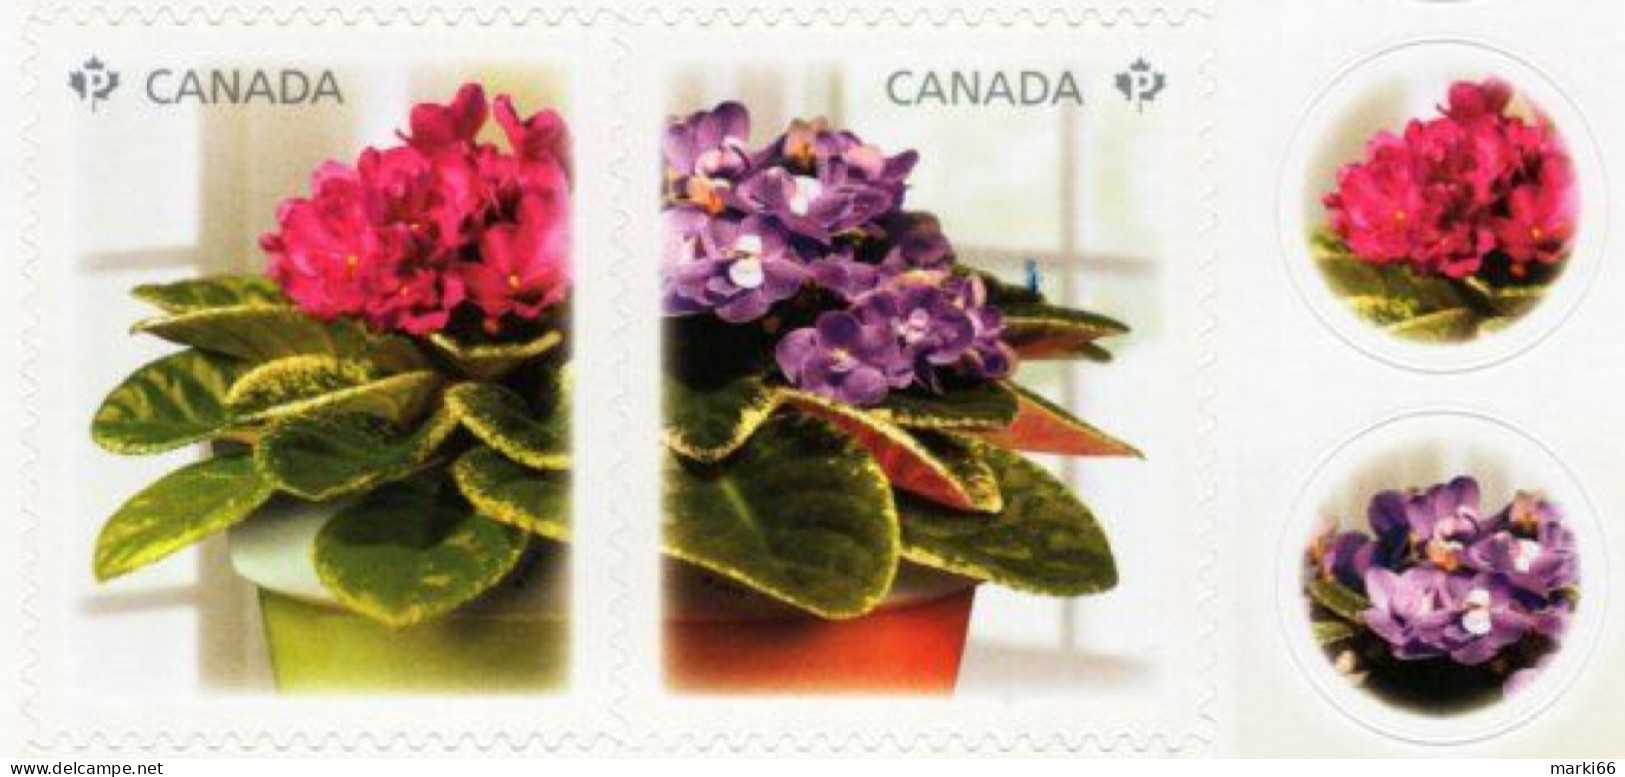 Canada - 2010 - African Violets - Saintpaulias - Mint Self-adhesive Booklet Stamp Set - Neufs